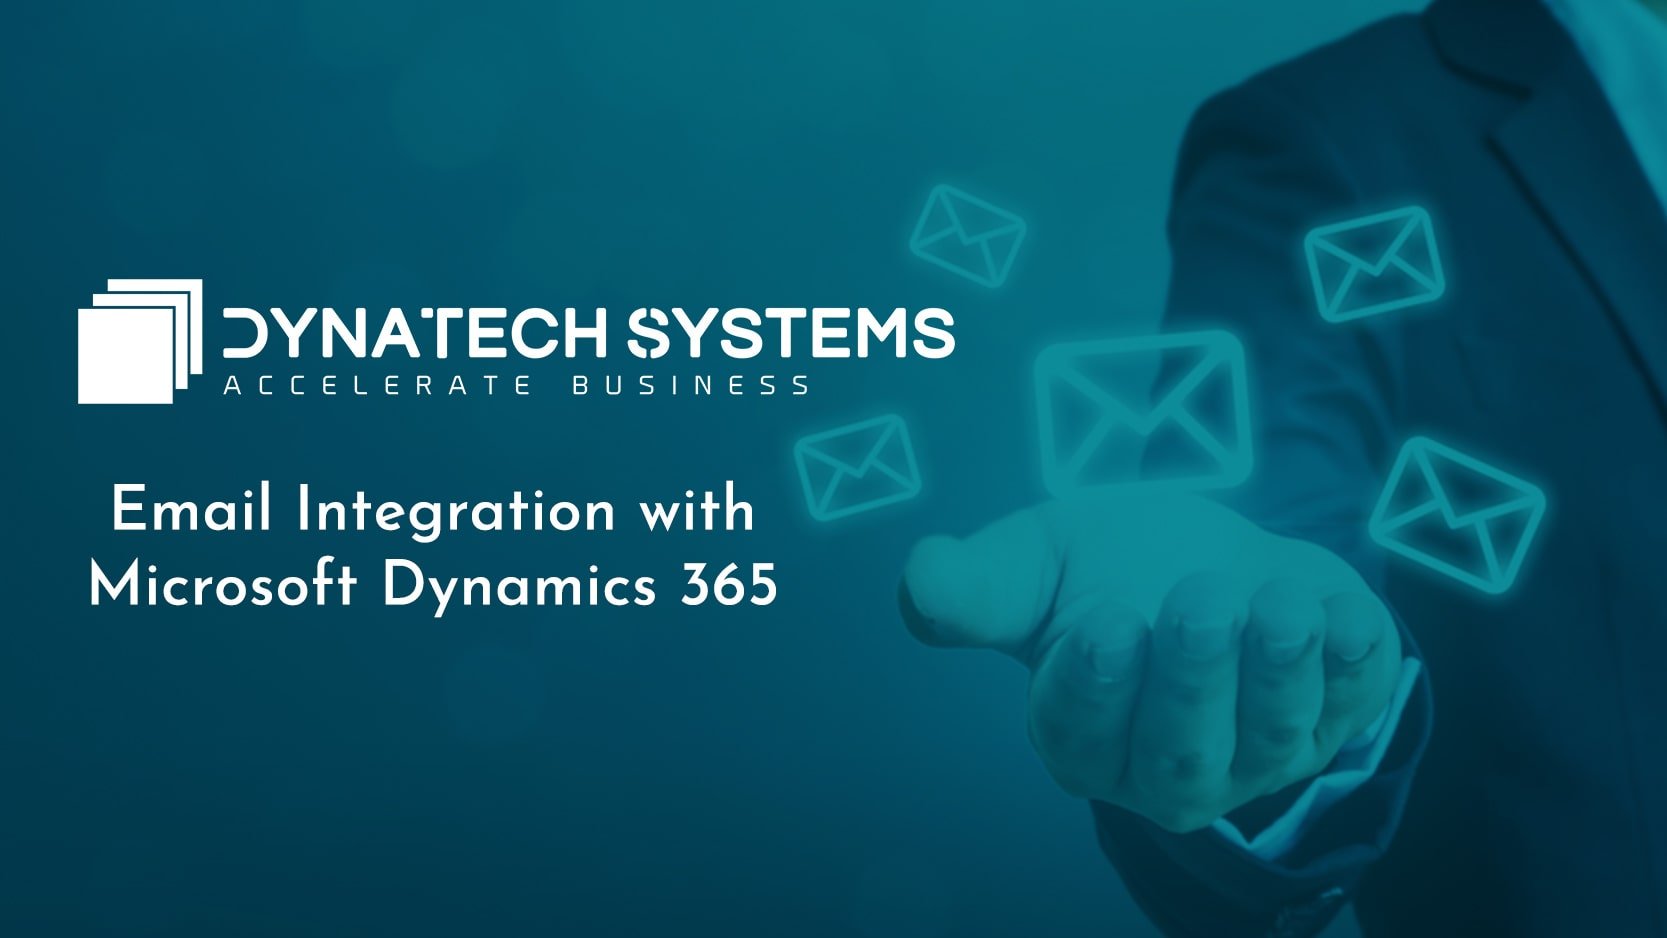 Dynamics 365 Email Integration: Simplify Email Communications